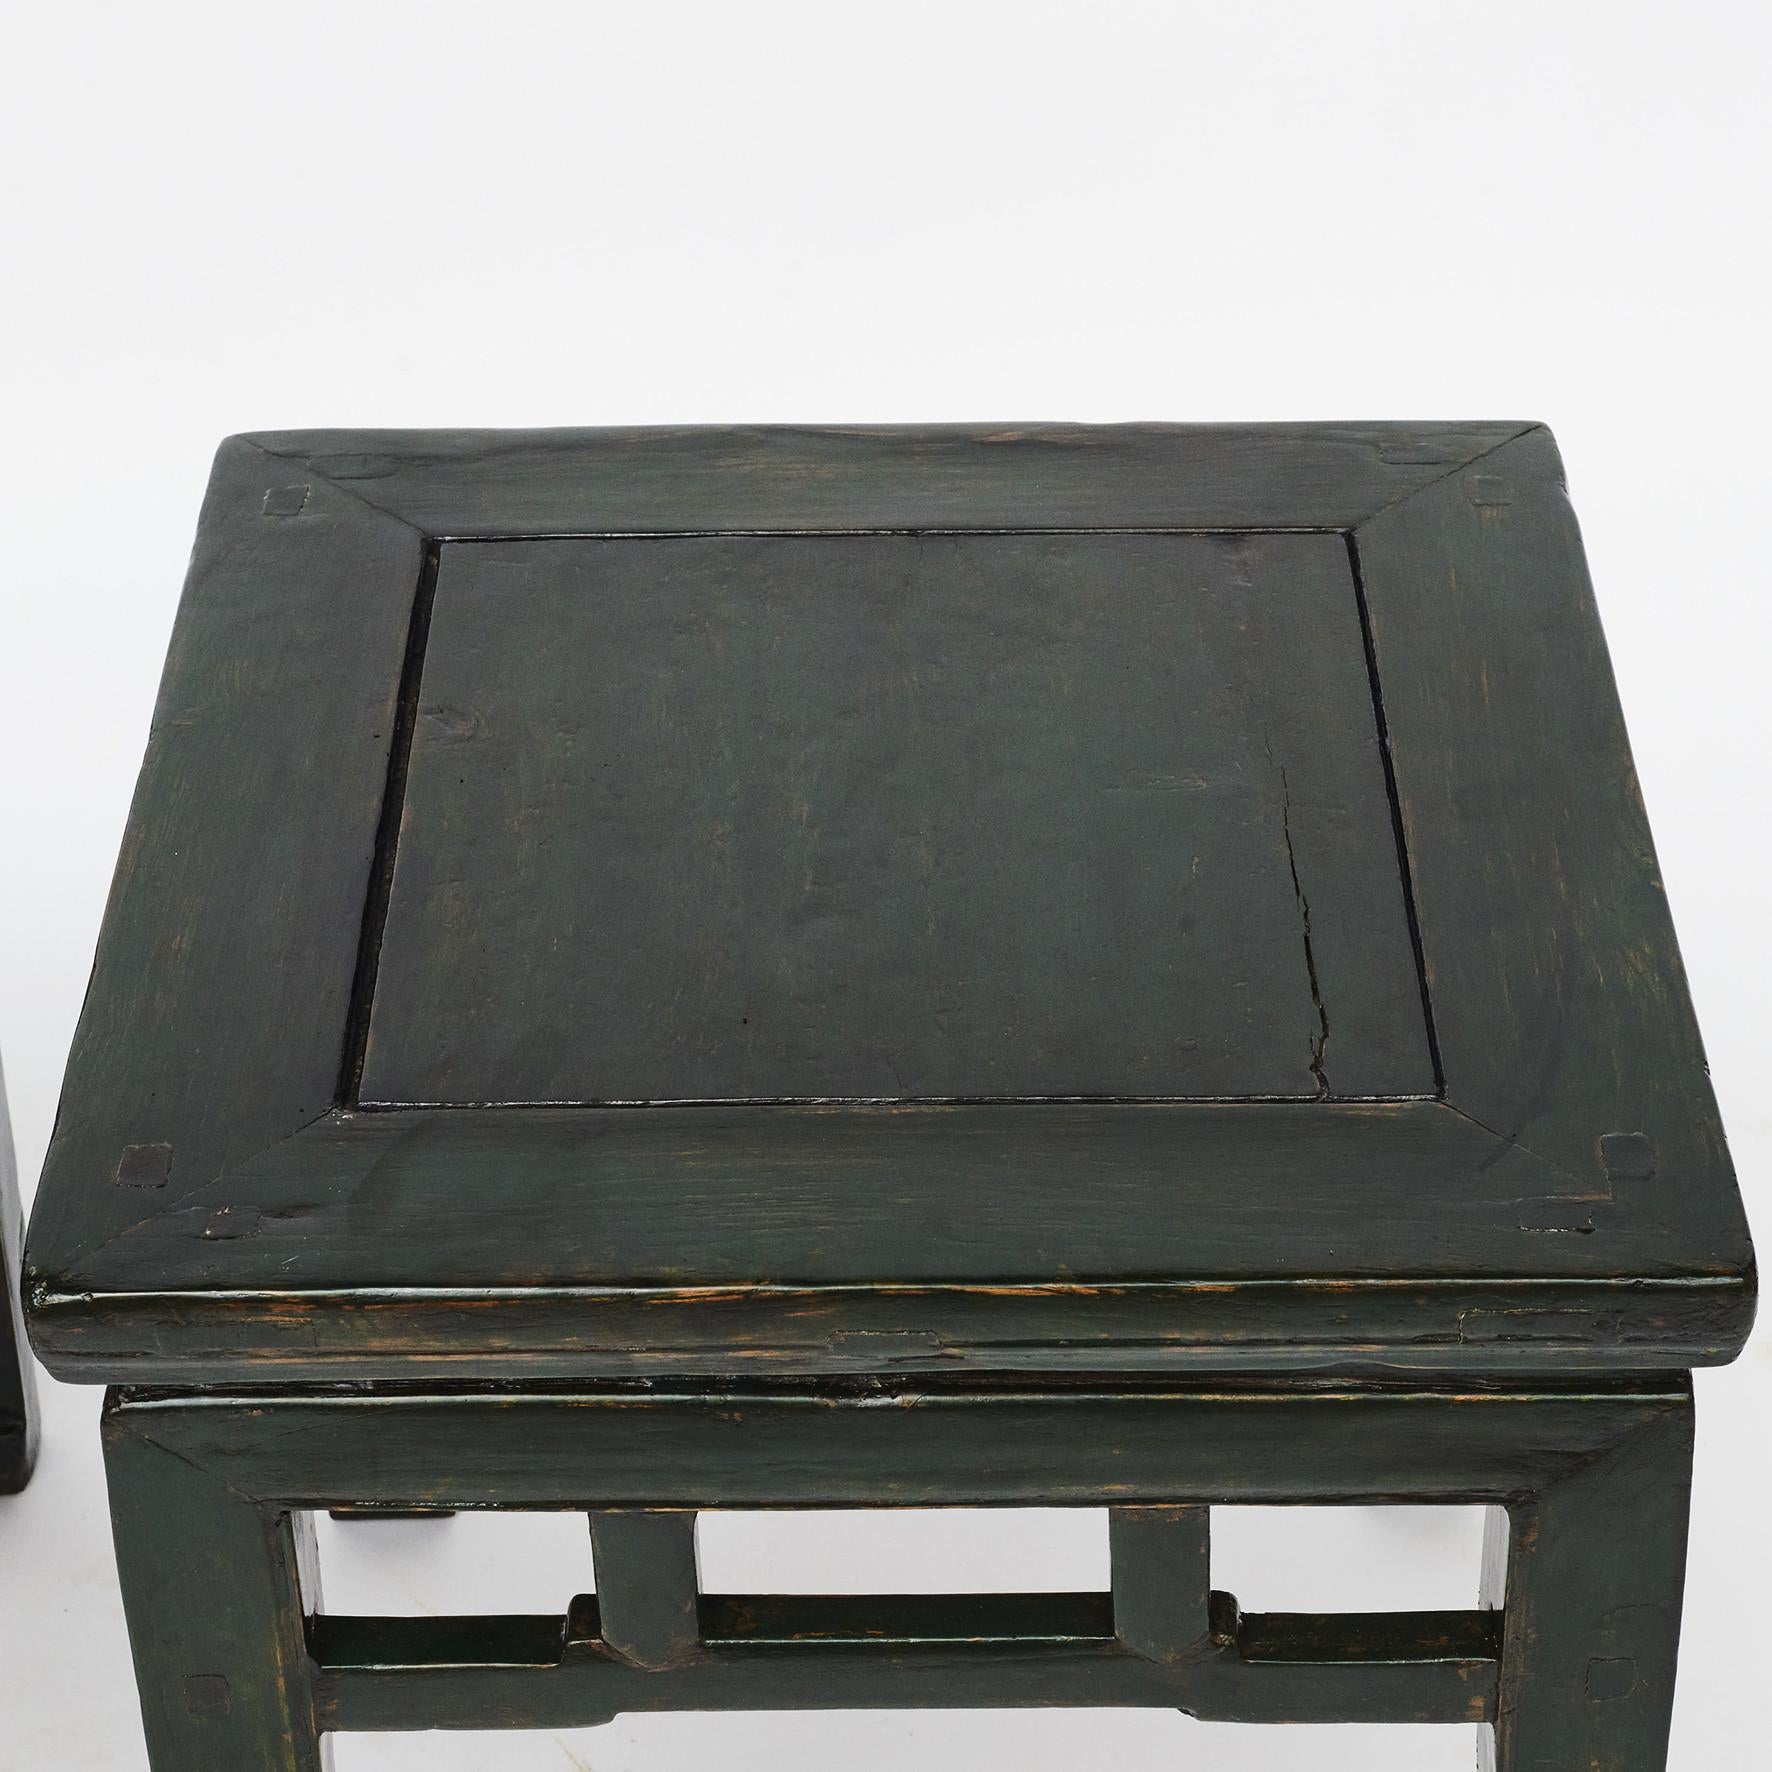 Pair of 19th century Qing Chinese elm wood side tables.
Original green lacquer finish with beautiful patina.
Shanxi Province circa 1880-1900.
Sold as a pair.